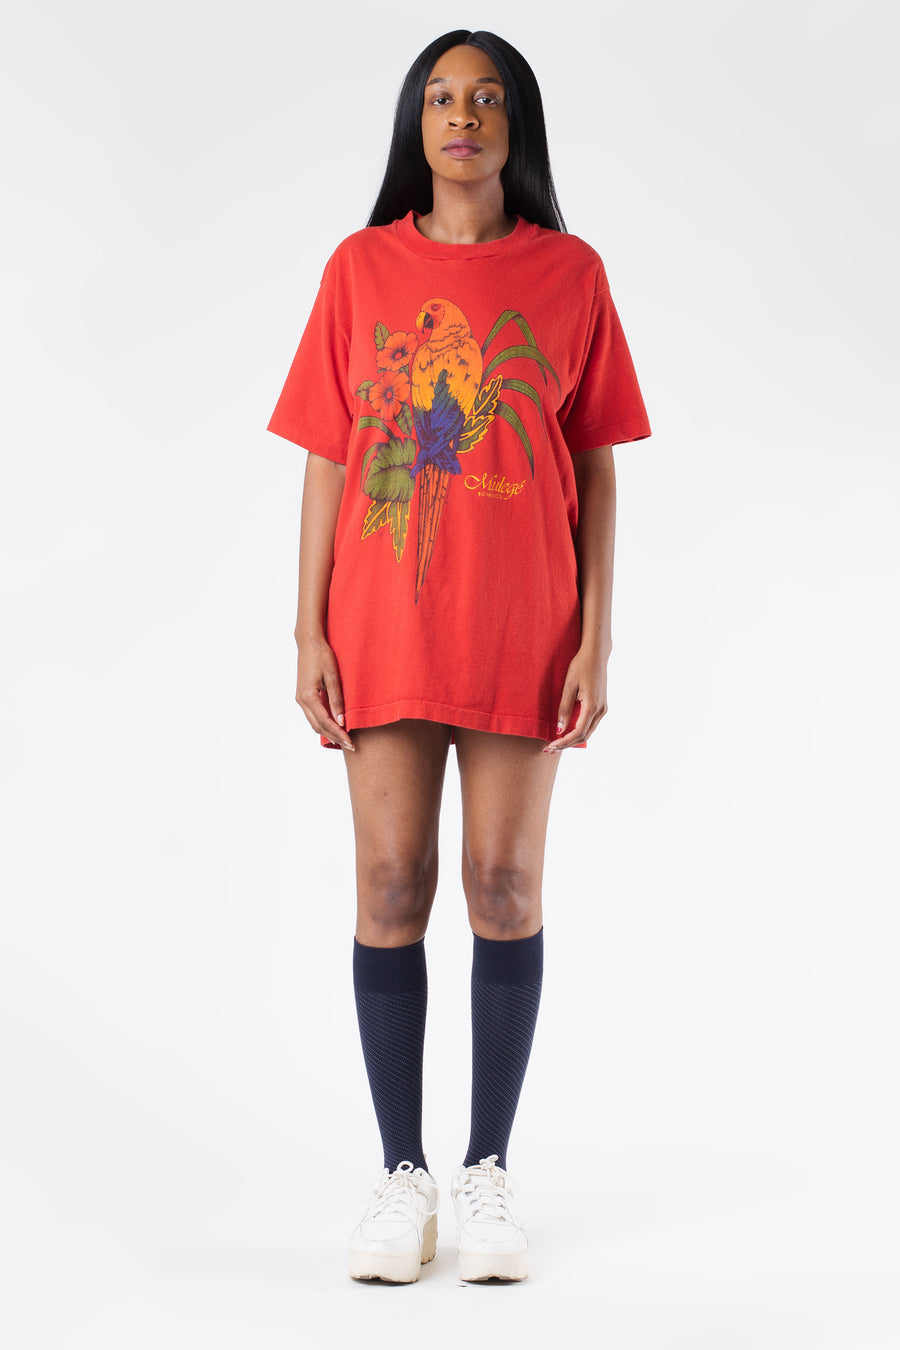 Vintage 90's Red Bird Mexico T-Shirt